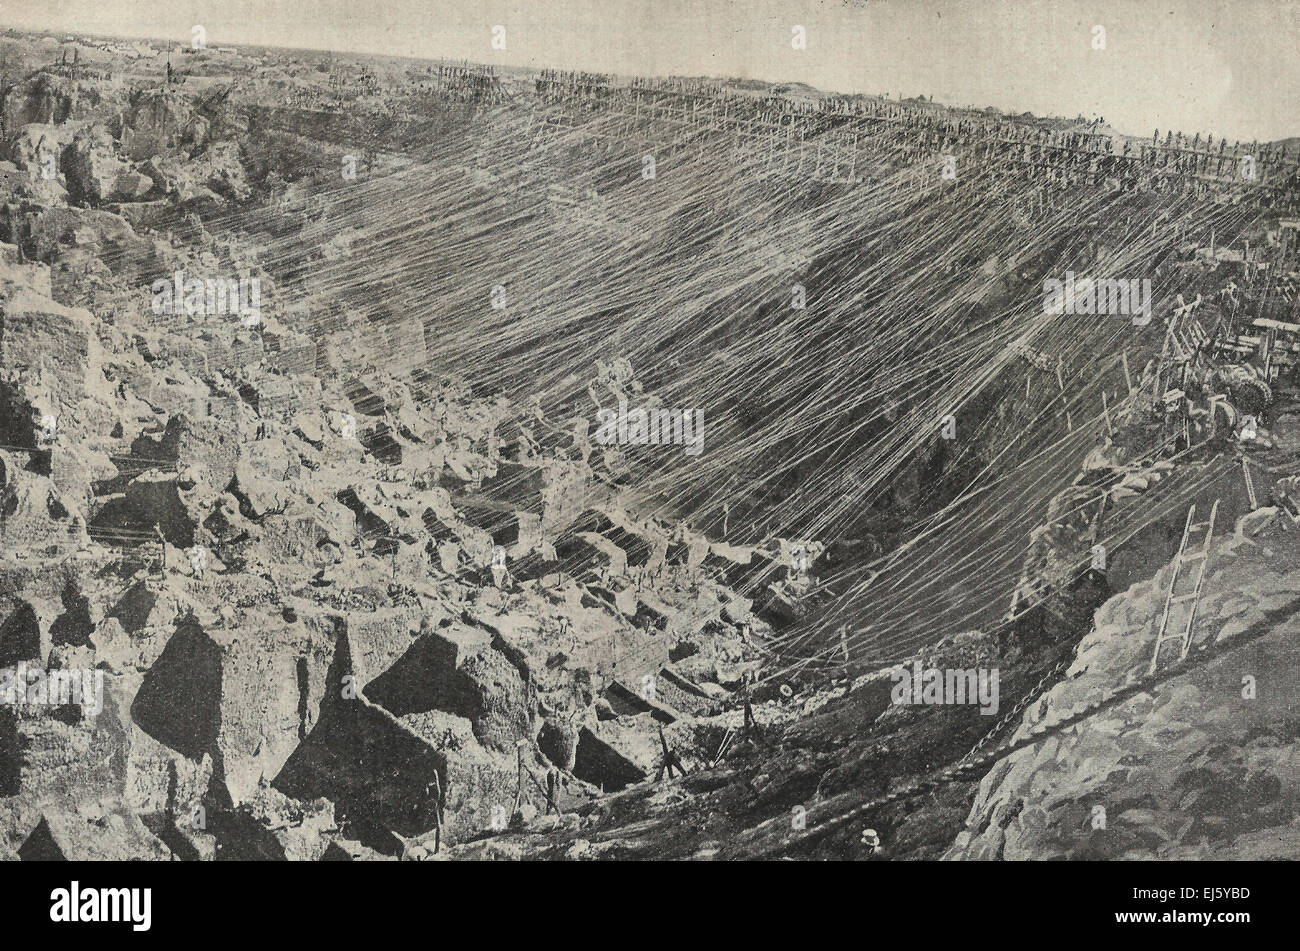 Old Workings - Kimberley Diamond Mines - The Diamonds are found in a grayish soil called blue clay.  Originally, each miner dug his own claim, the deeper they dug, the more claims fell in upom another, necessitating the amalgamation of many claims into a few large mines, circa 1898 Stock Photo